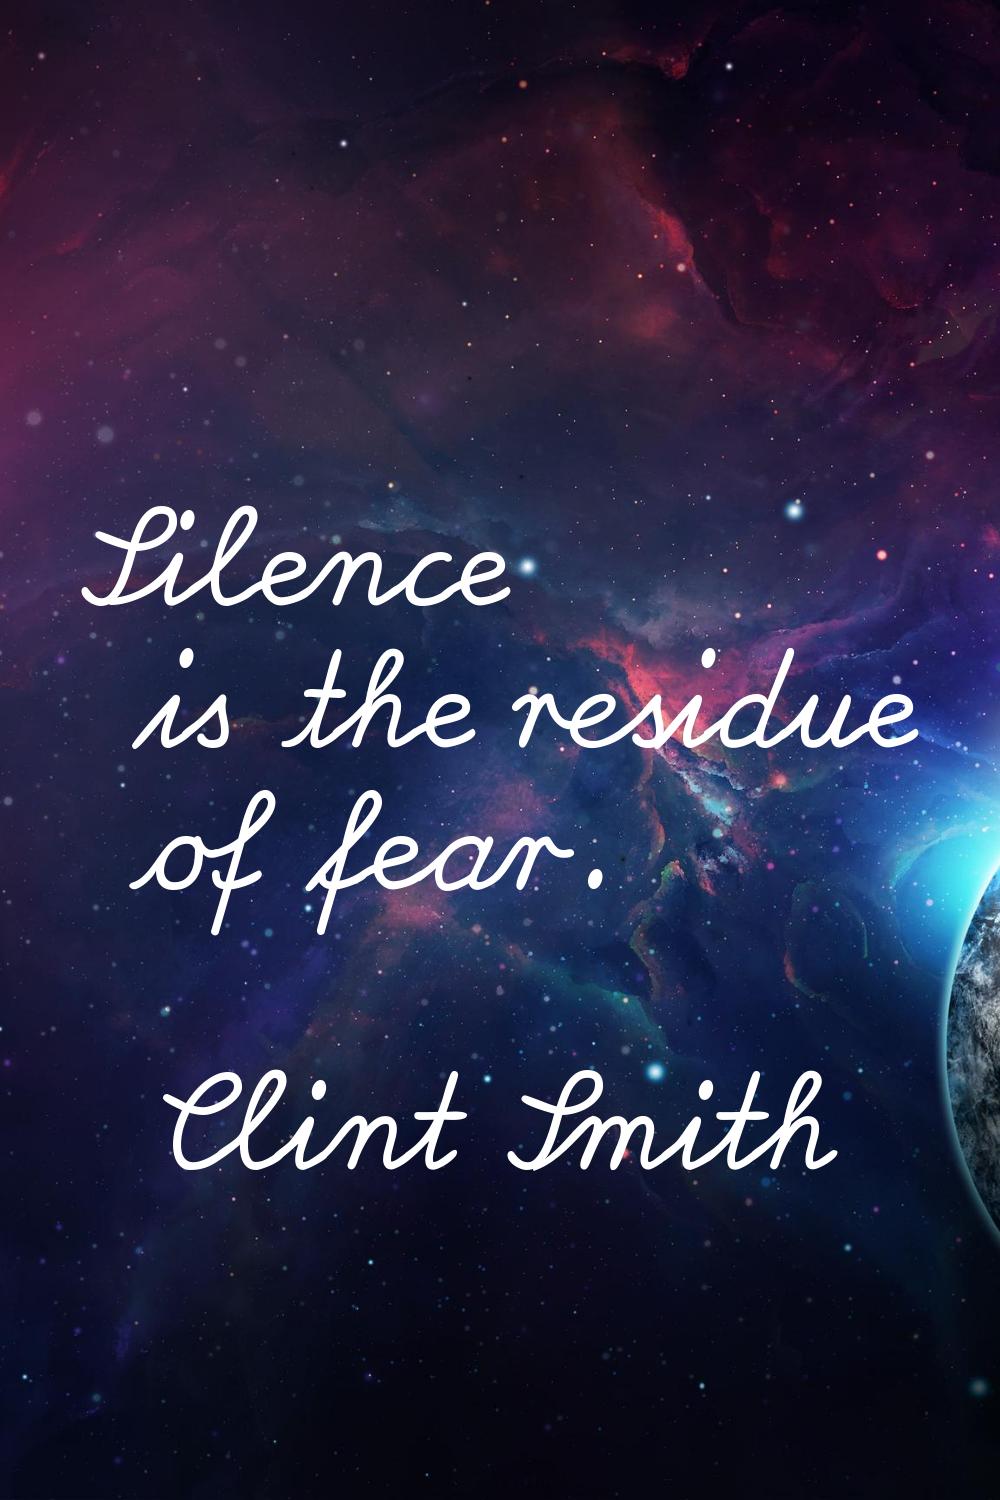 Silence is the residue of fear.